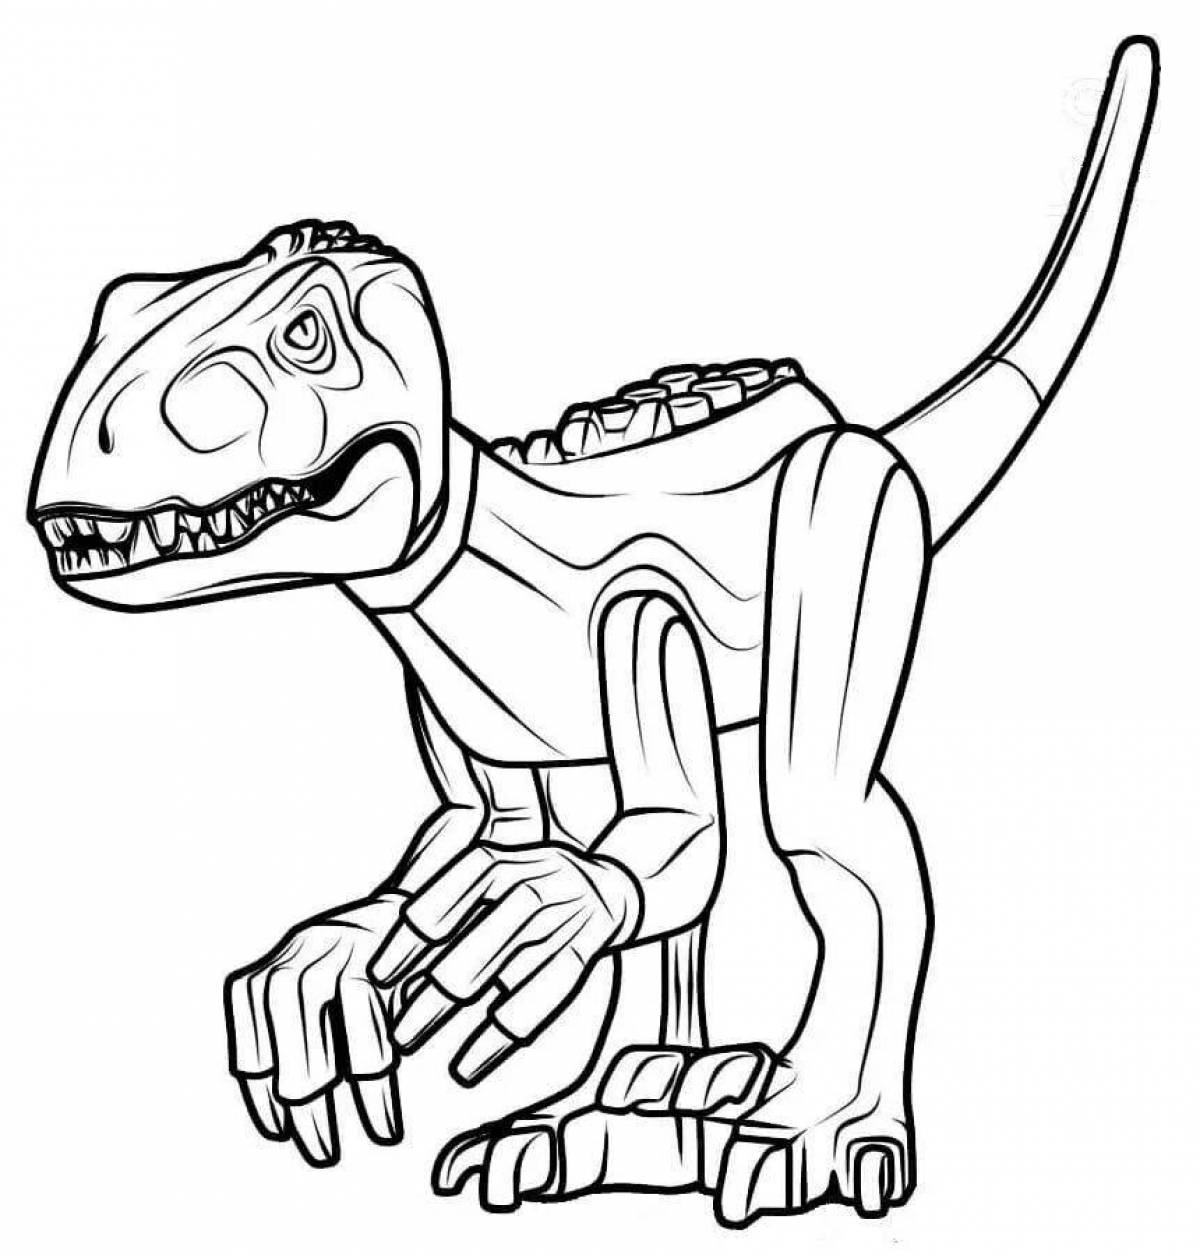 Lego dinosaurs jurassic world coloring page